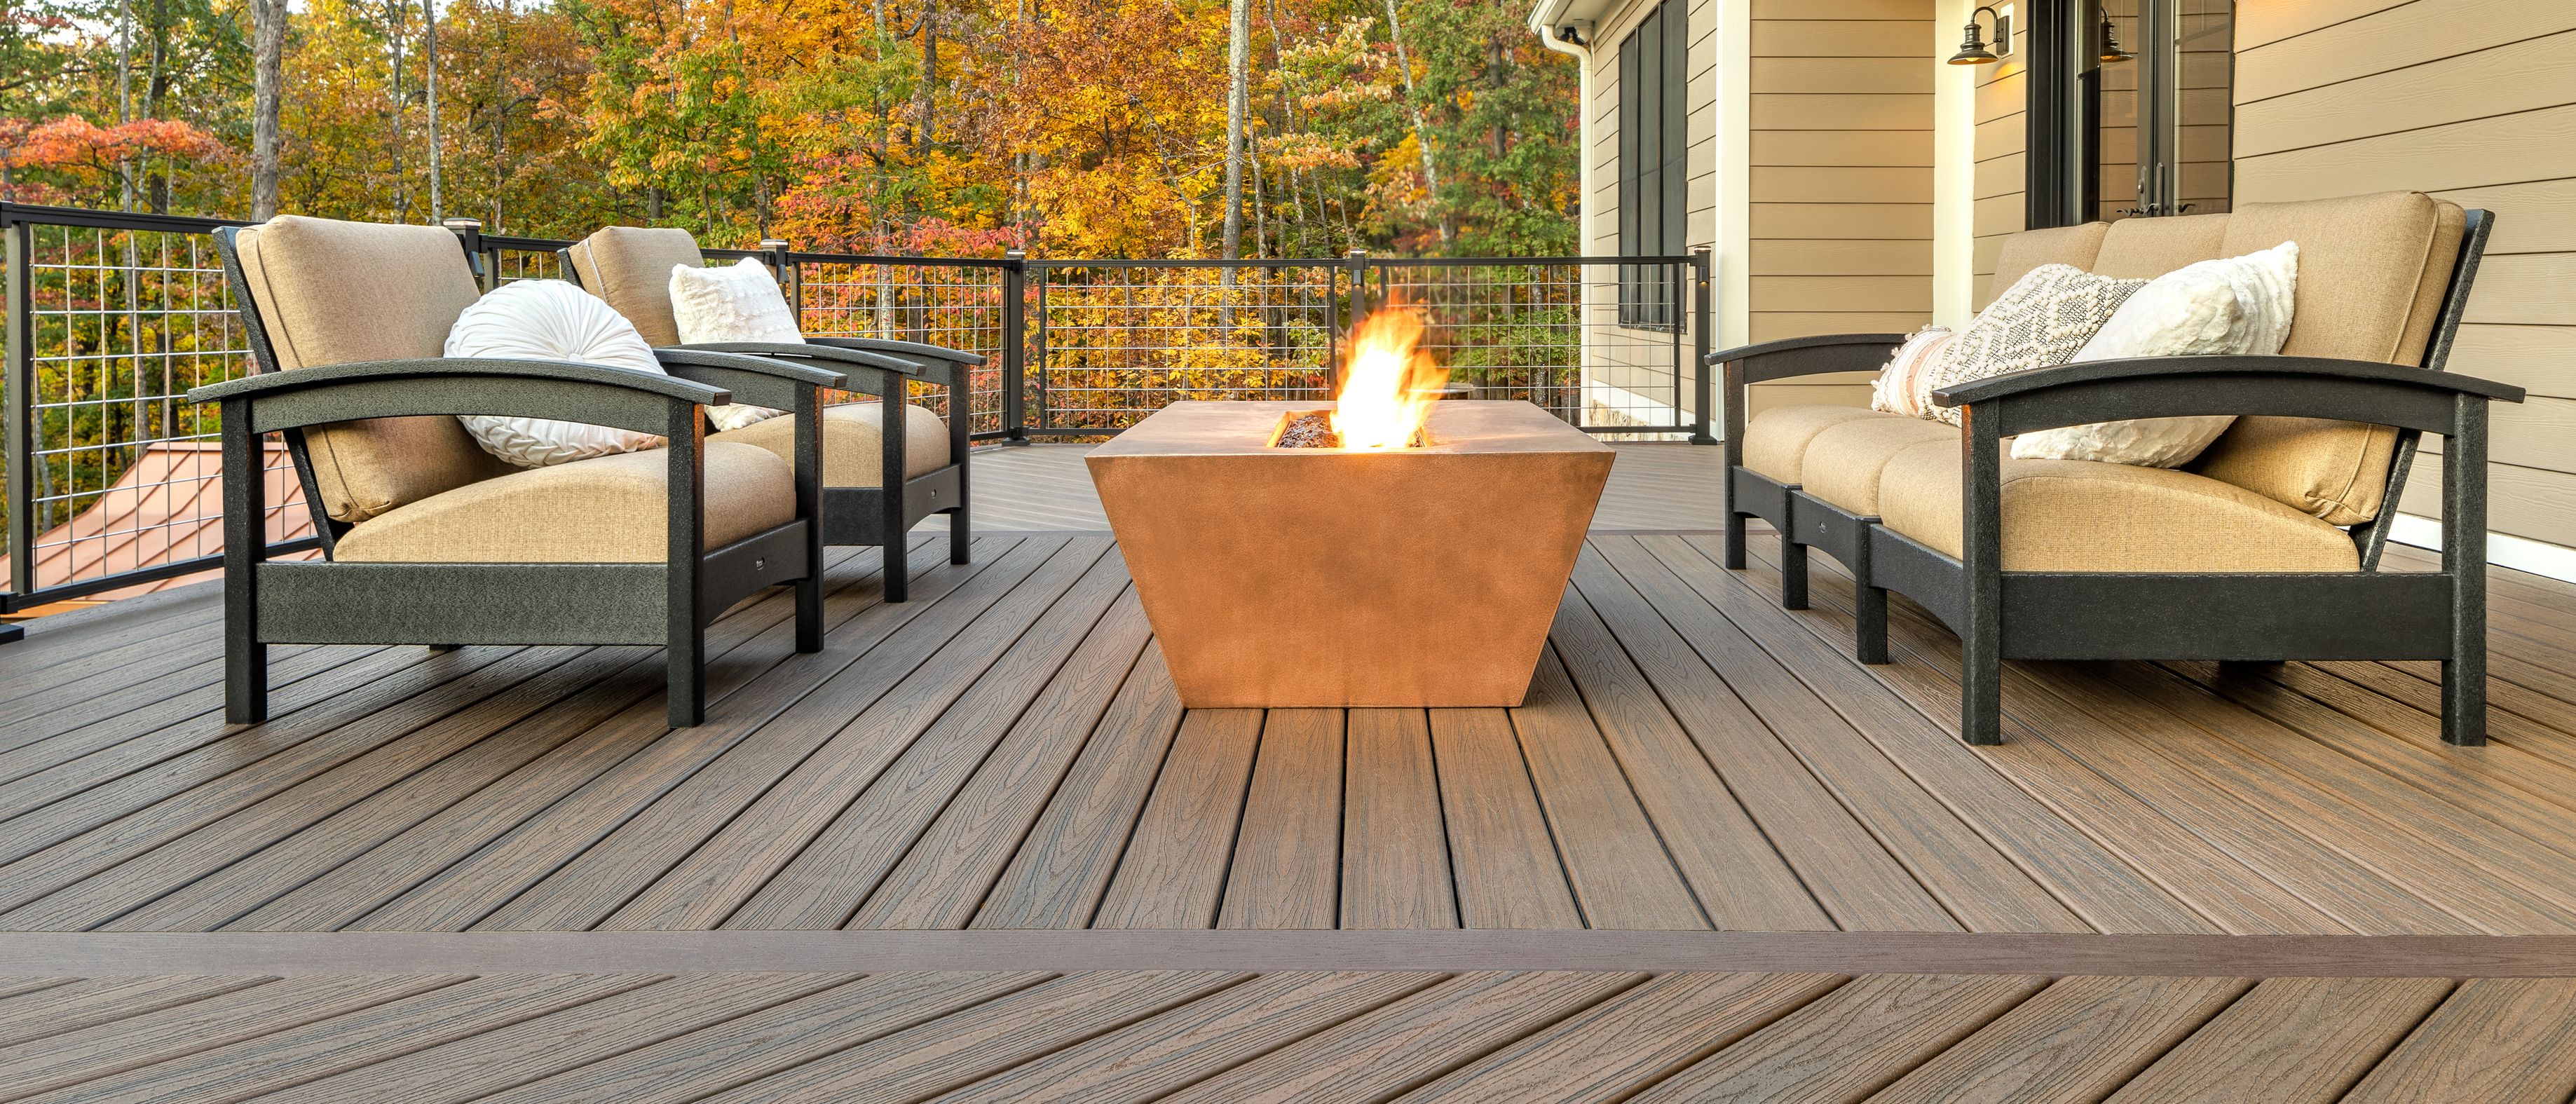 Trex® Outdoor Furniture™ | Composite Chairs & Tables | Trex